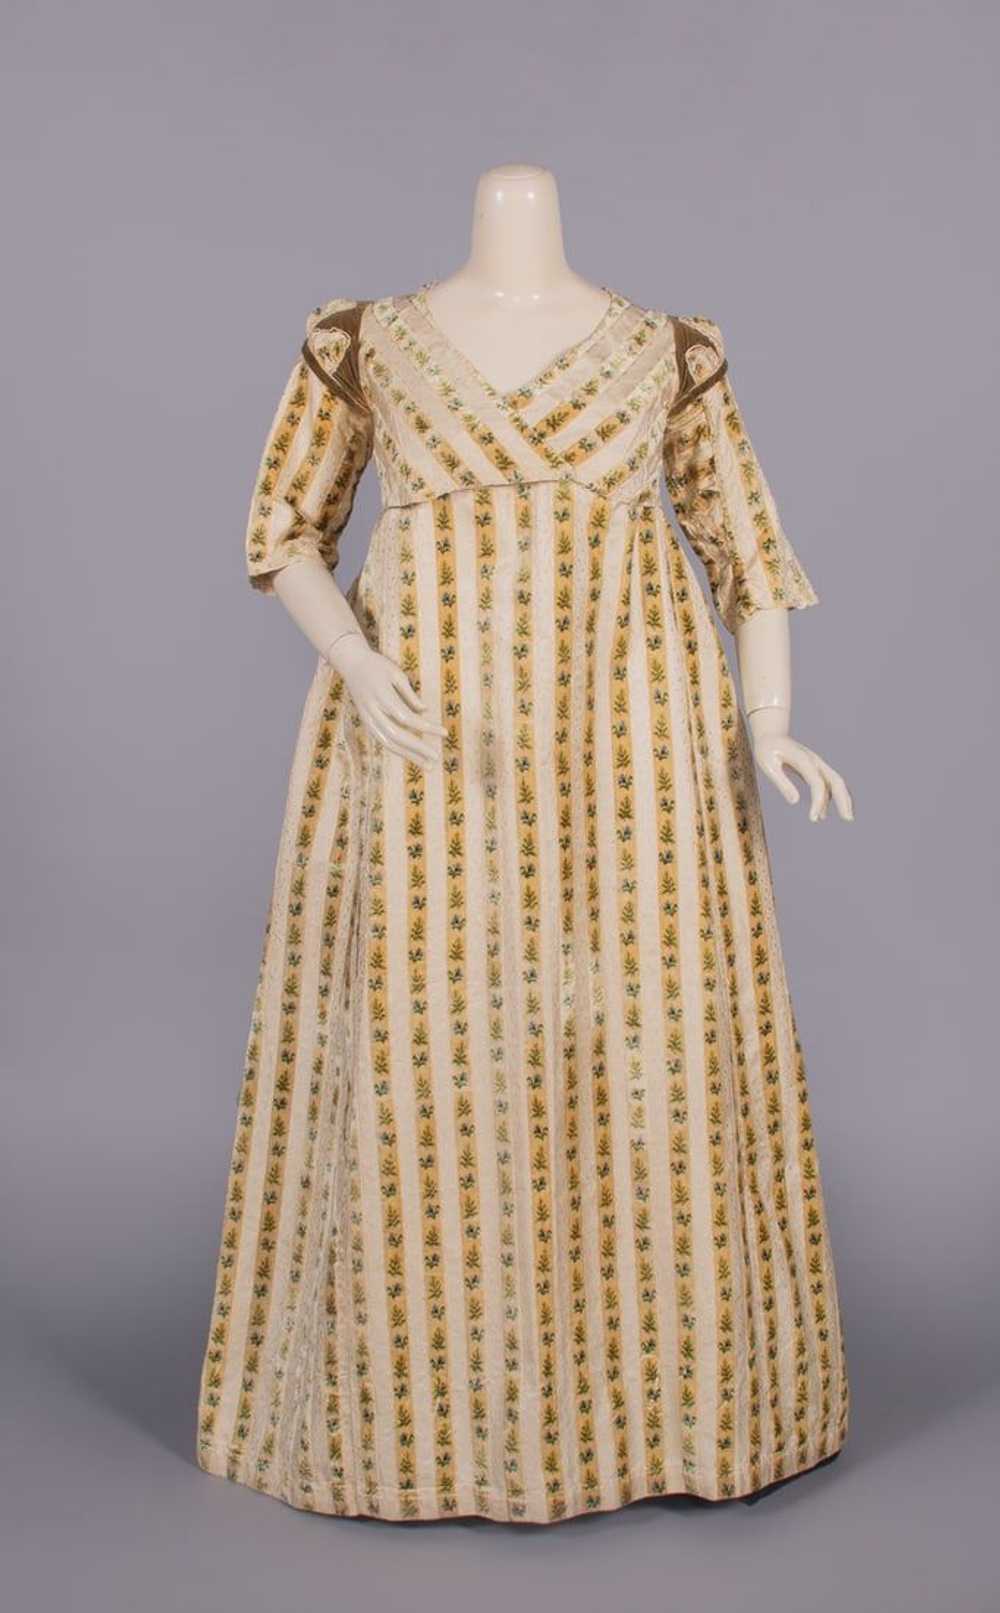 PRINTED VELVET & PATTERNED SILK ROUND GOWN, c. 17… - image 2